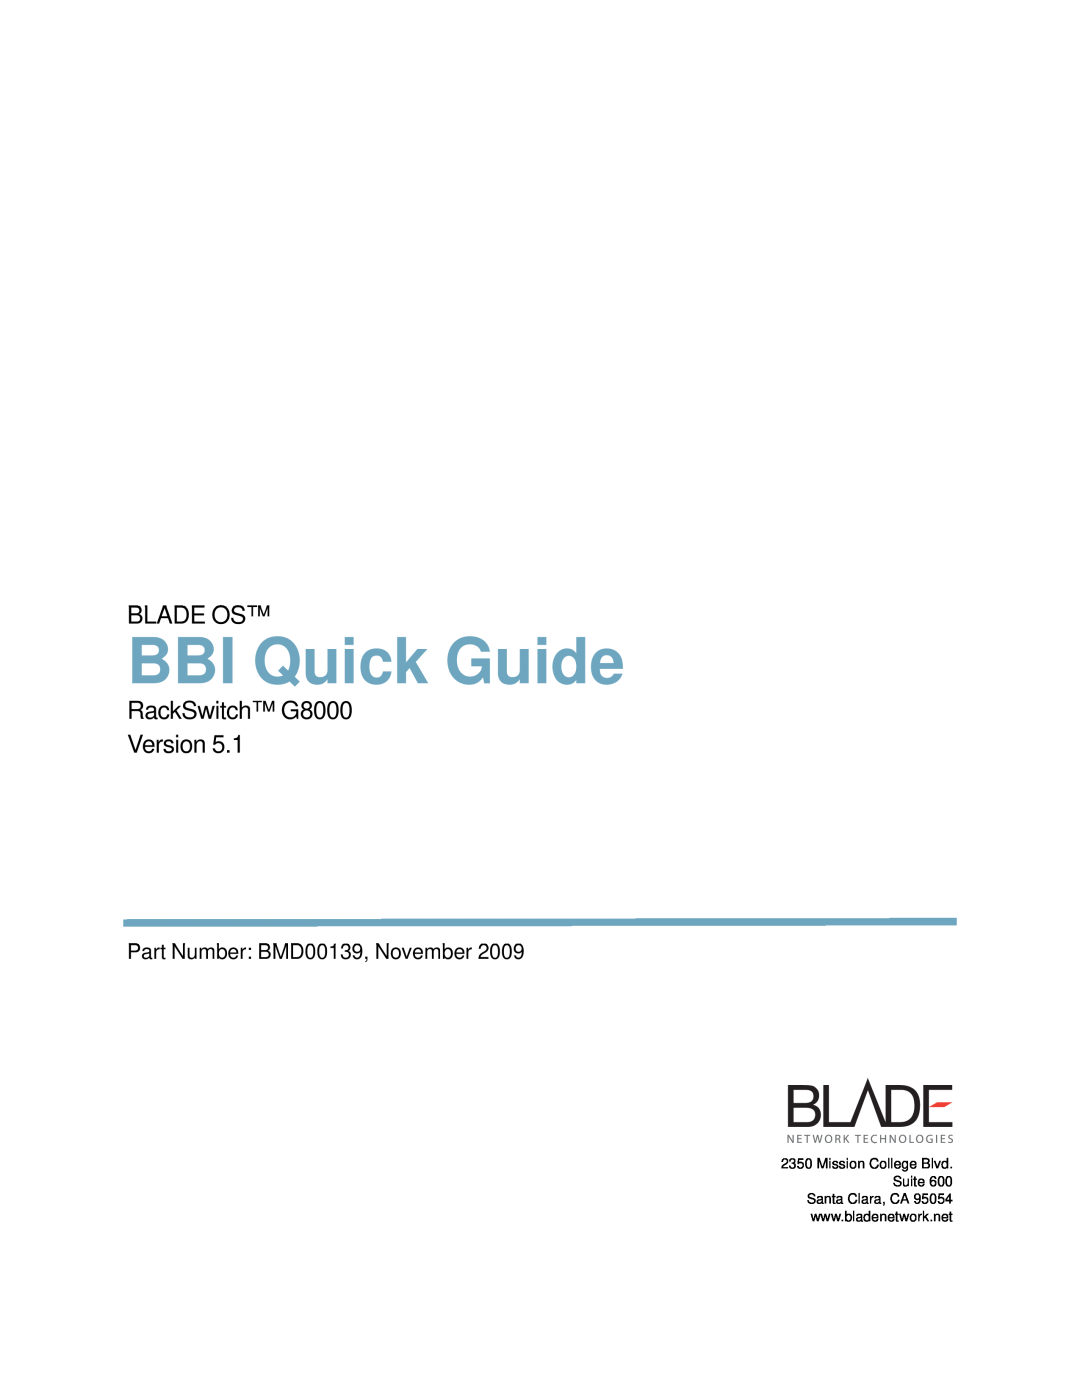 Blade ICE manual BBI Quick Guide, Blade Os, RackSwitch G8000 Version, Part Number BMD00139, November 